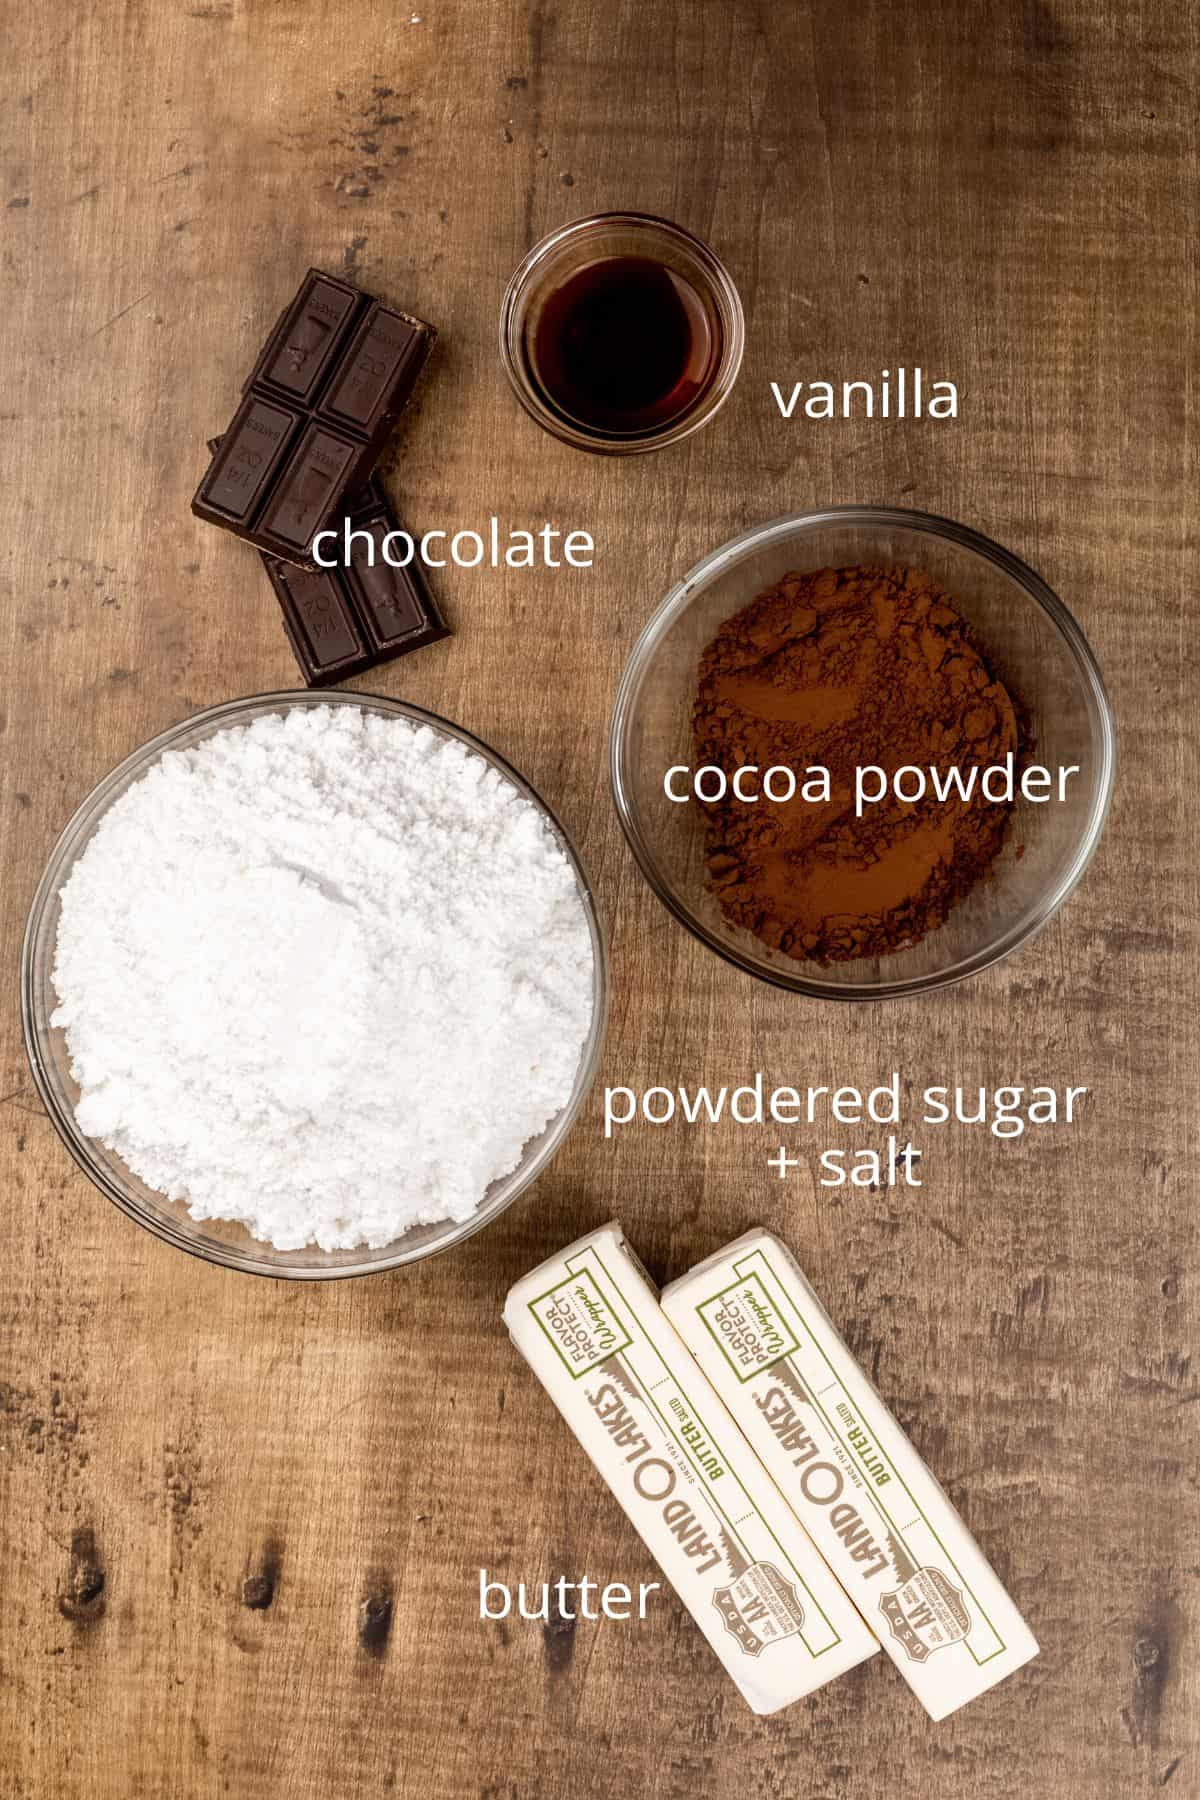 ingredients for chocolate frosting in various glass bowls on the wood kitchen table